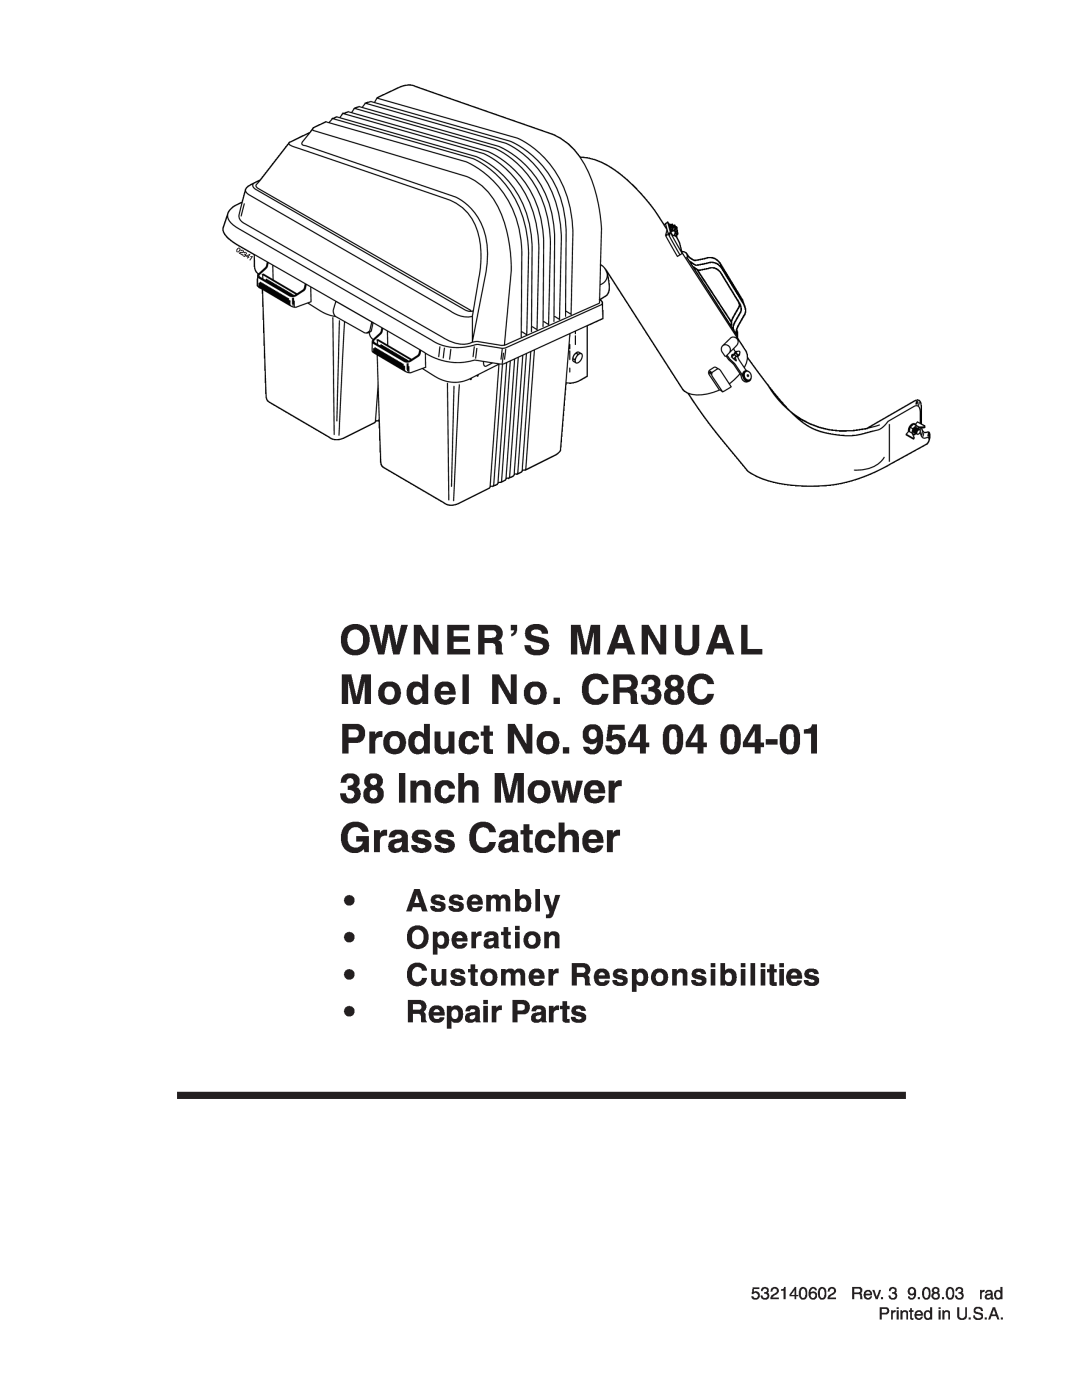 Poulan 532140602, CR38C owner manual Grass Catcher, Assembly Operation Customer Responsibilities Repair Parts, tain 